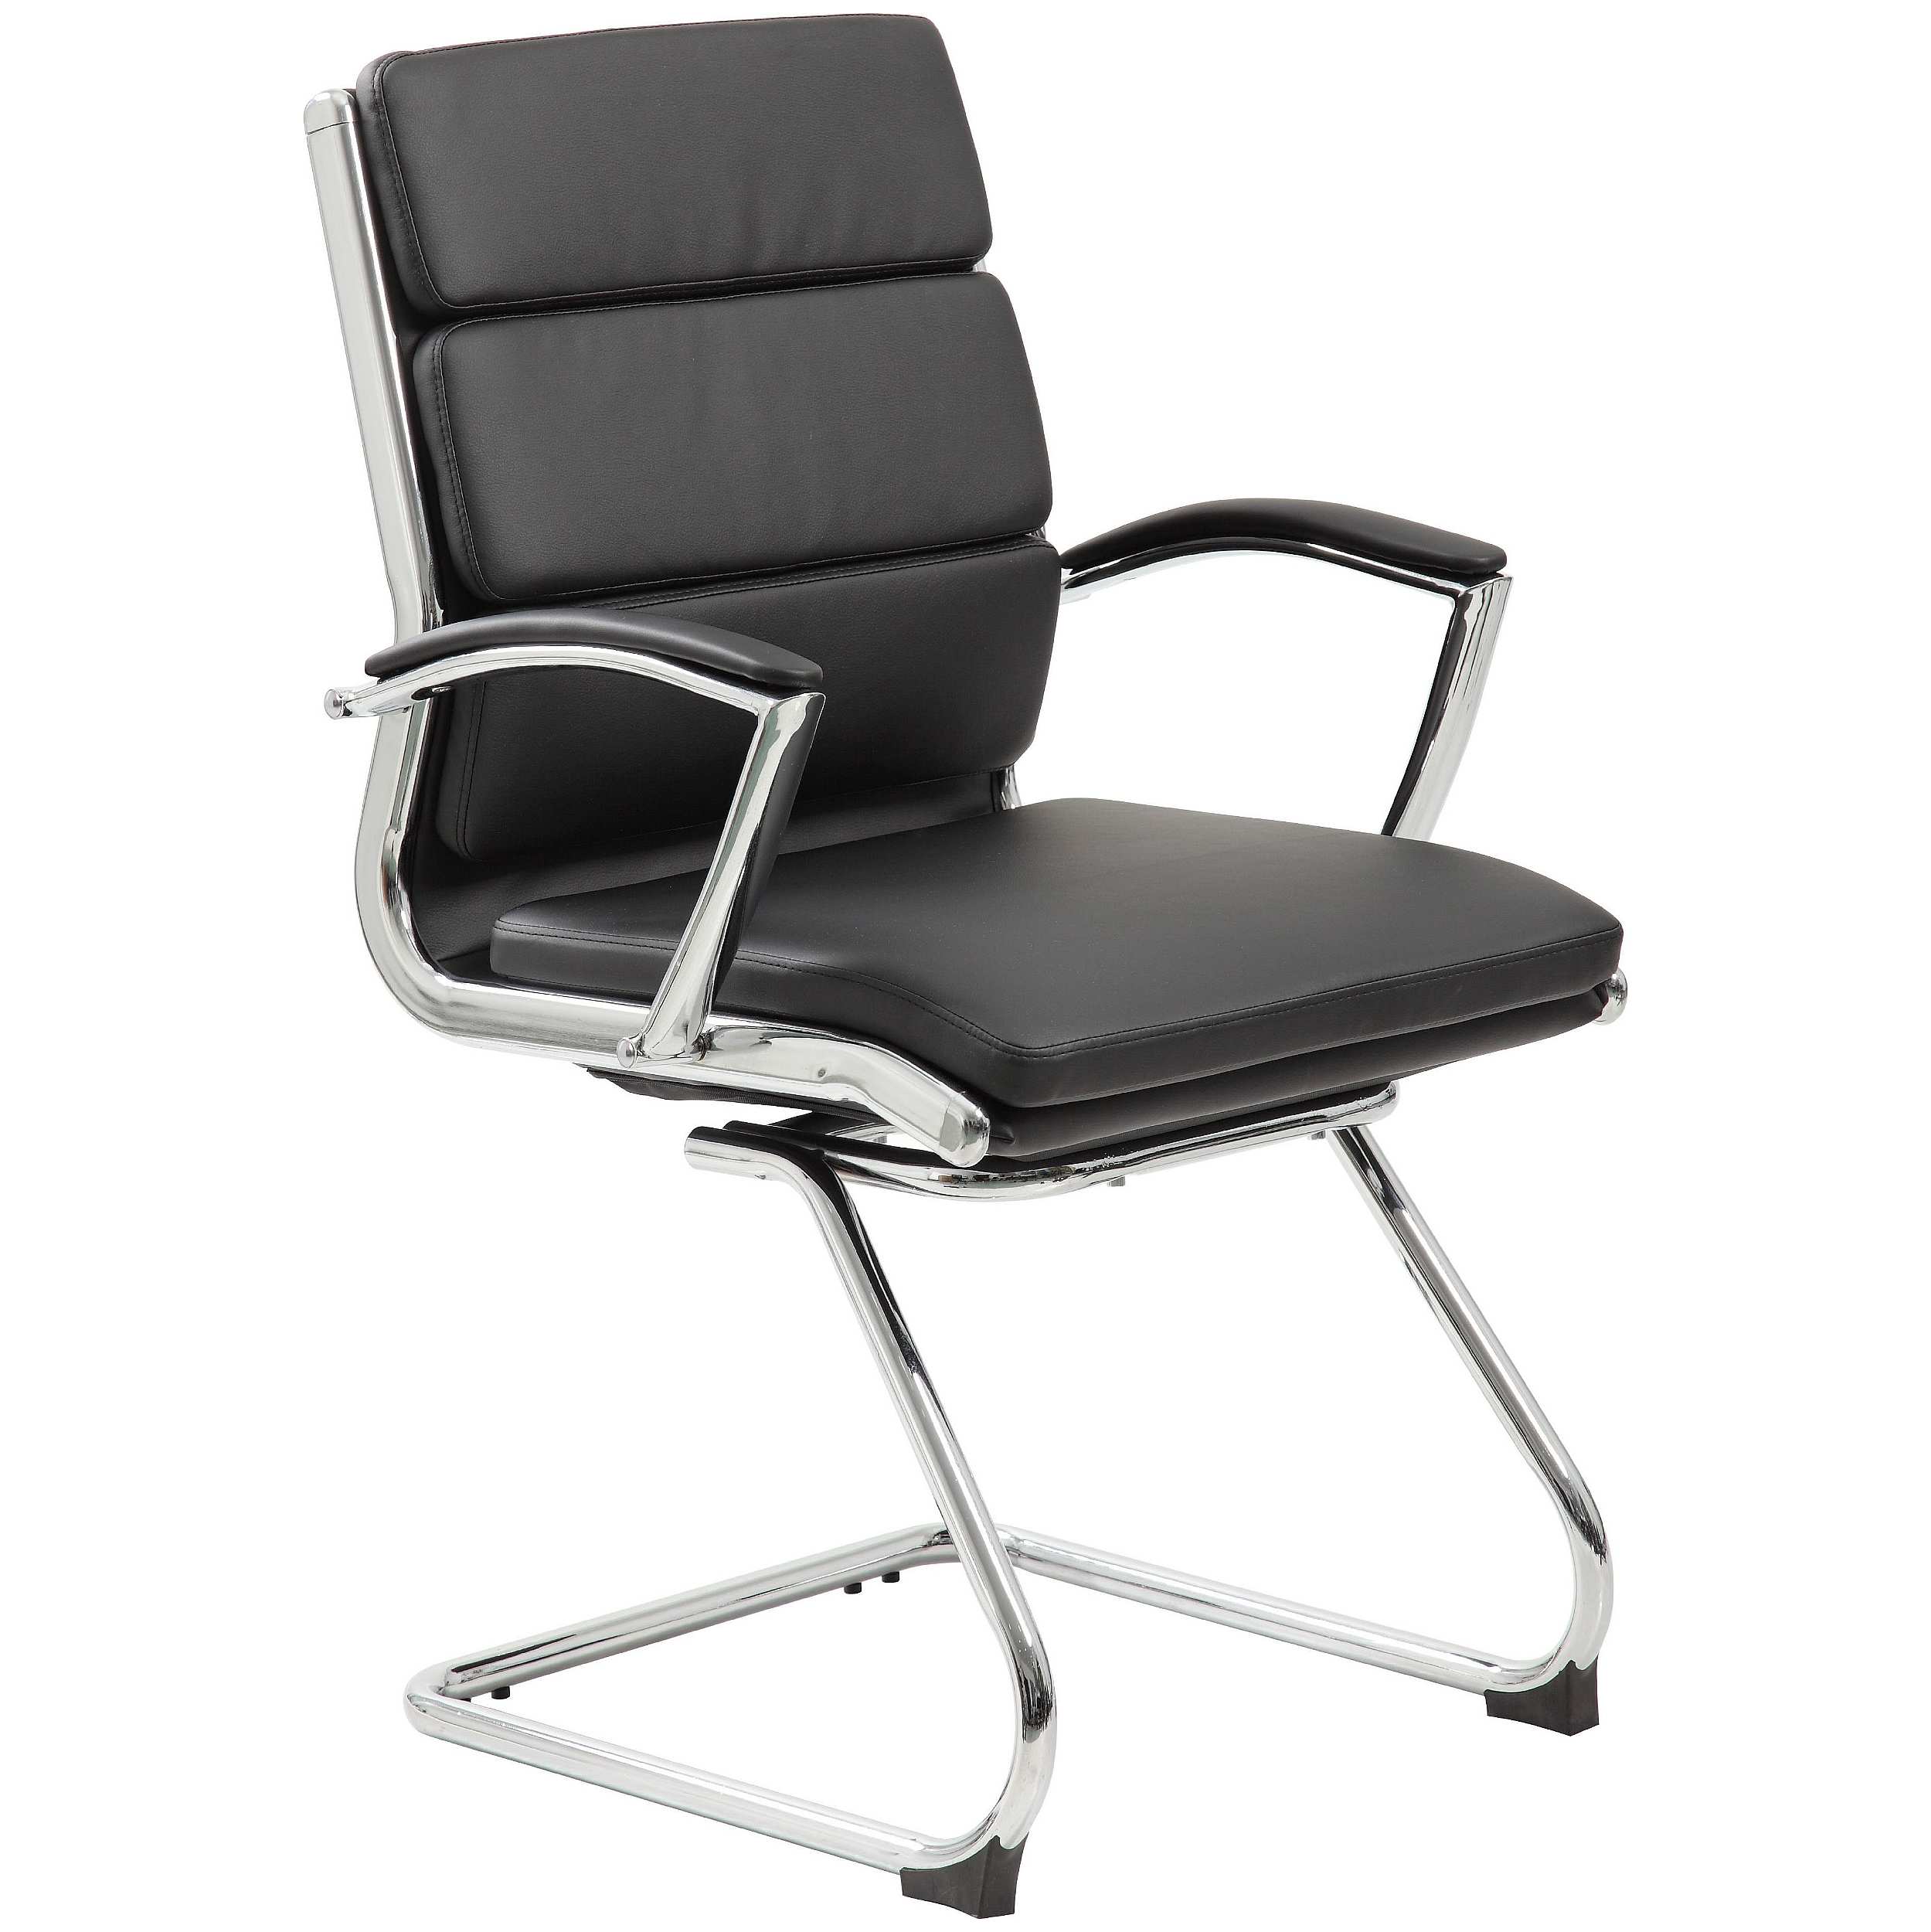 Venice Bonded Leather Visitor / Boardroom Chair | Visitor ...